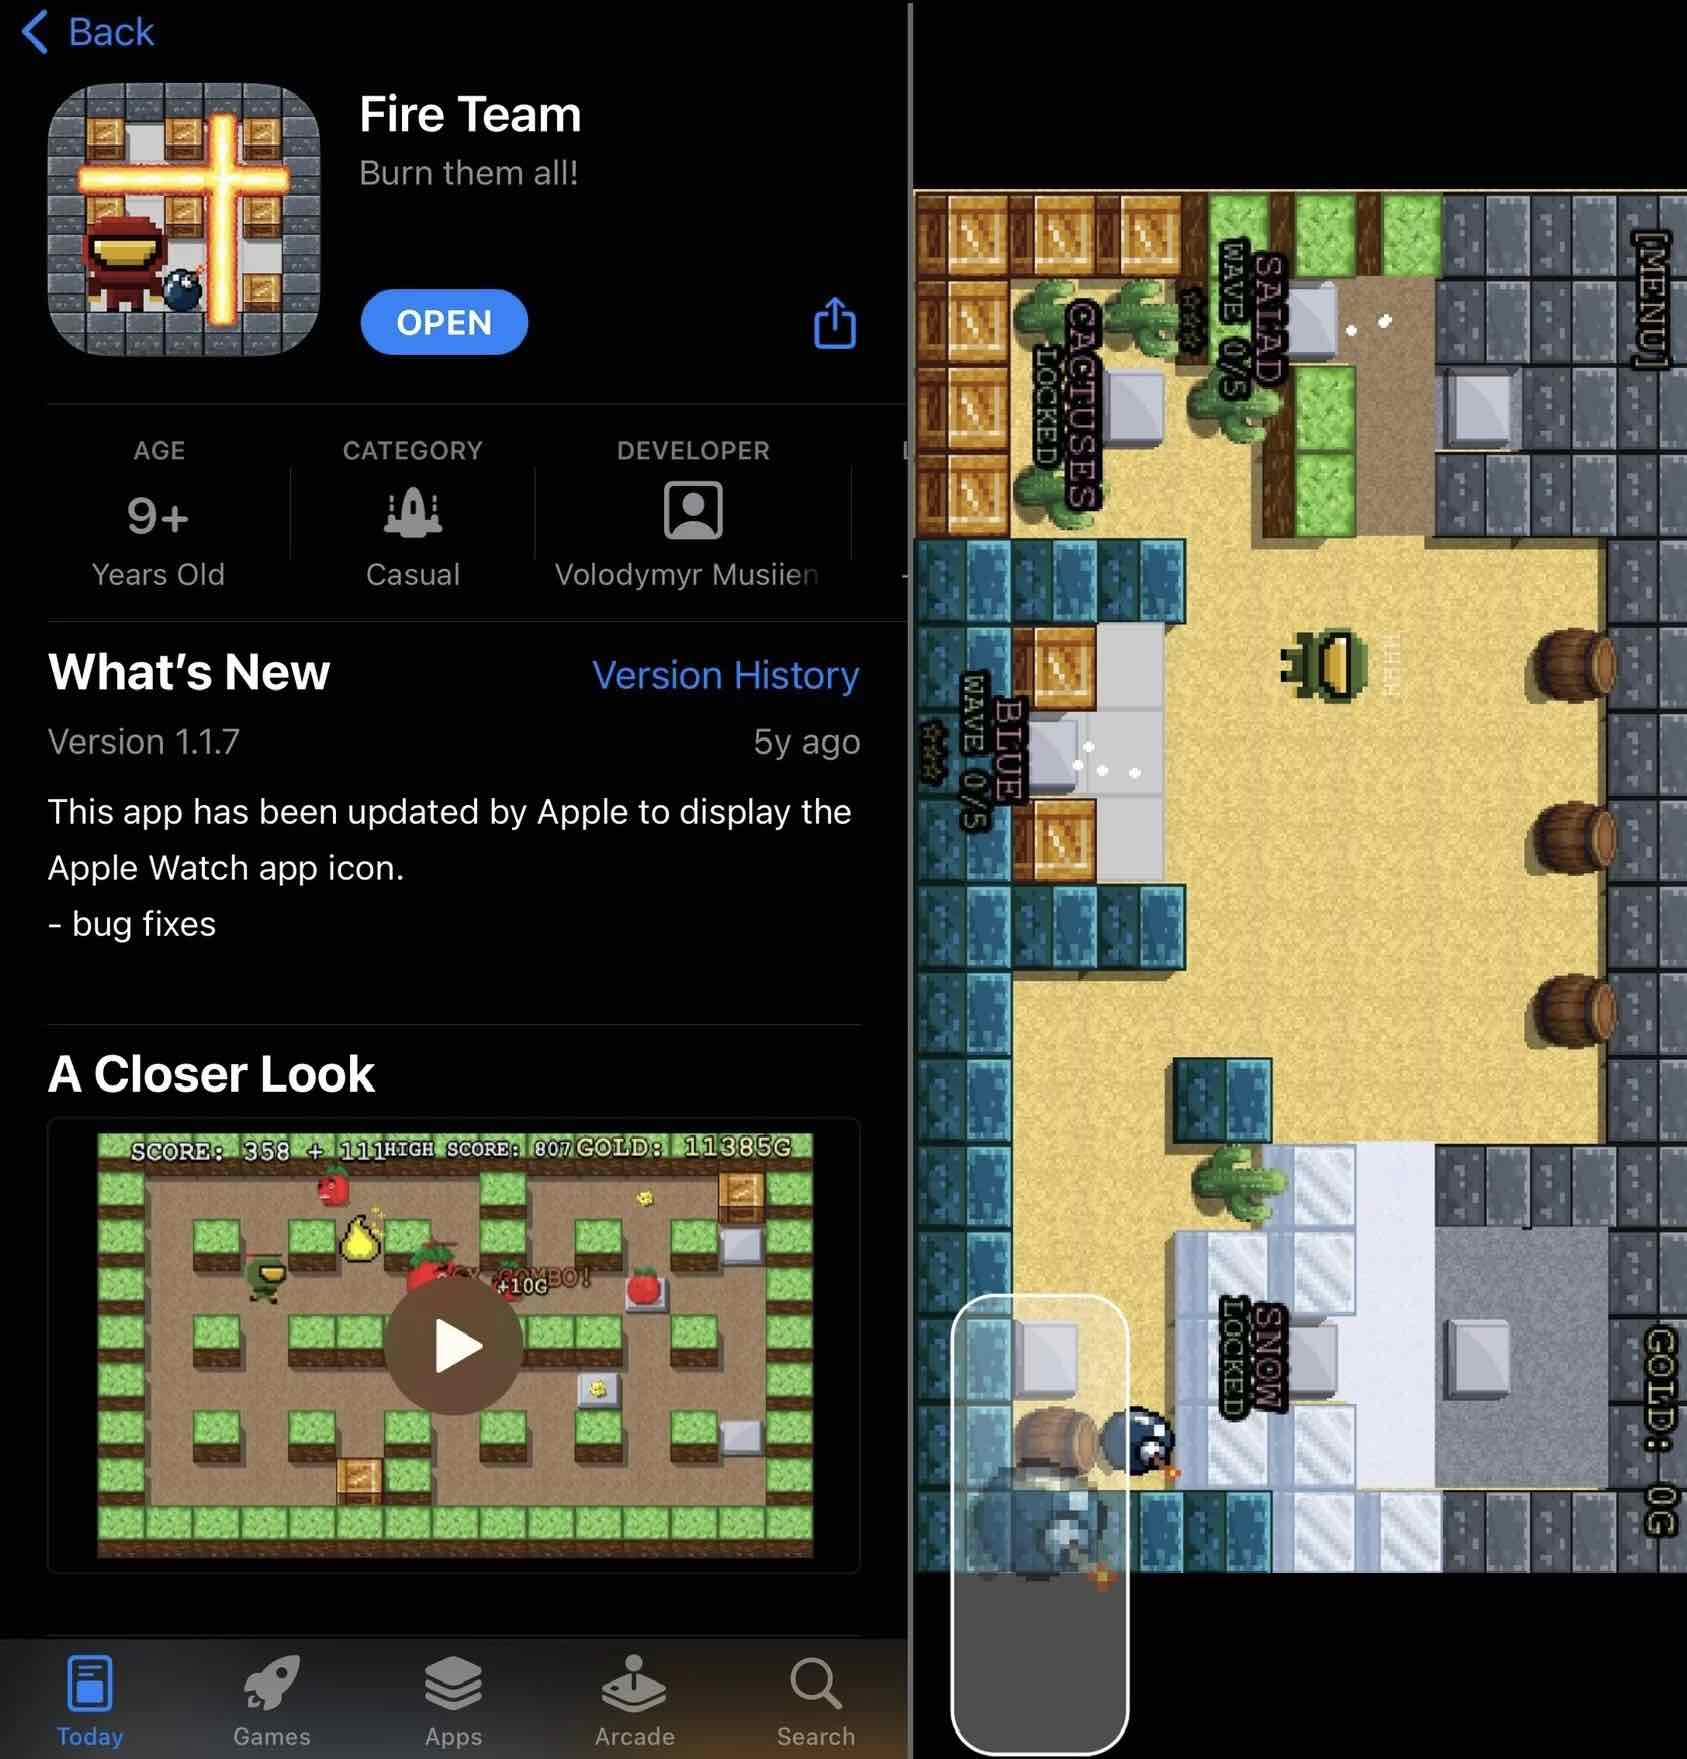 Fire Team game on the iPhone